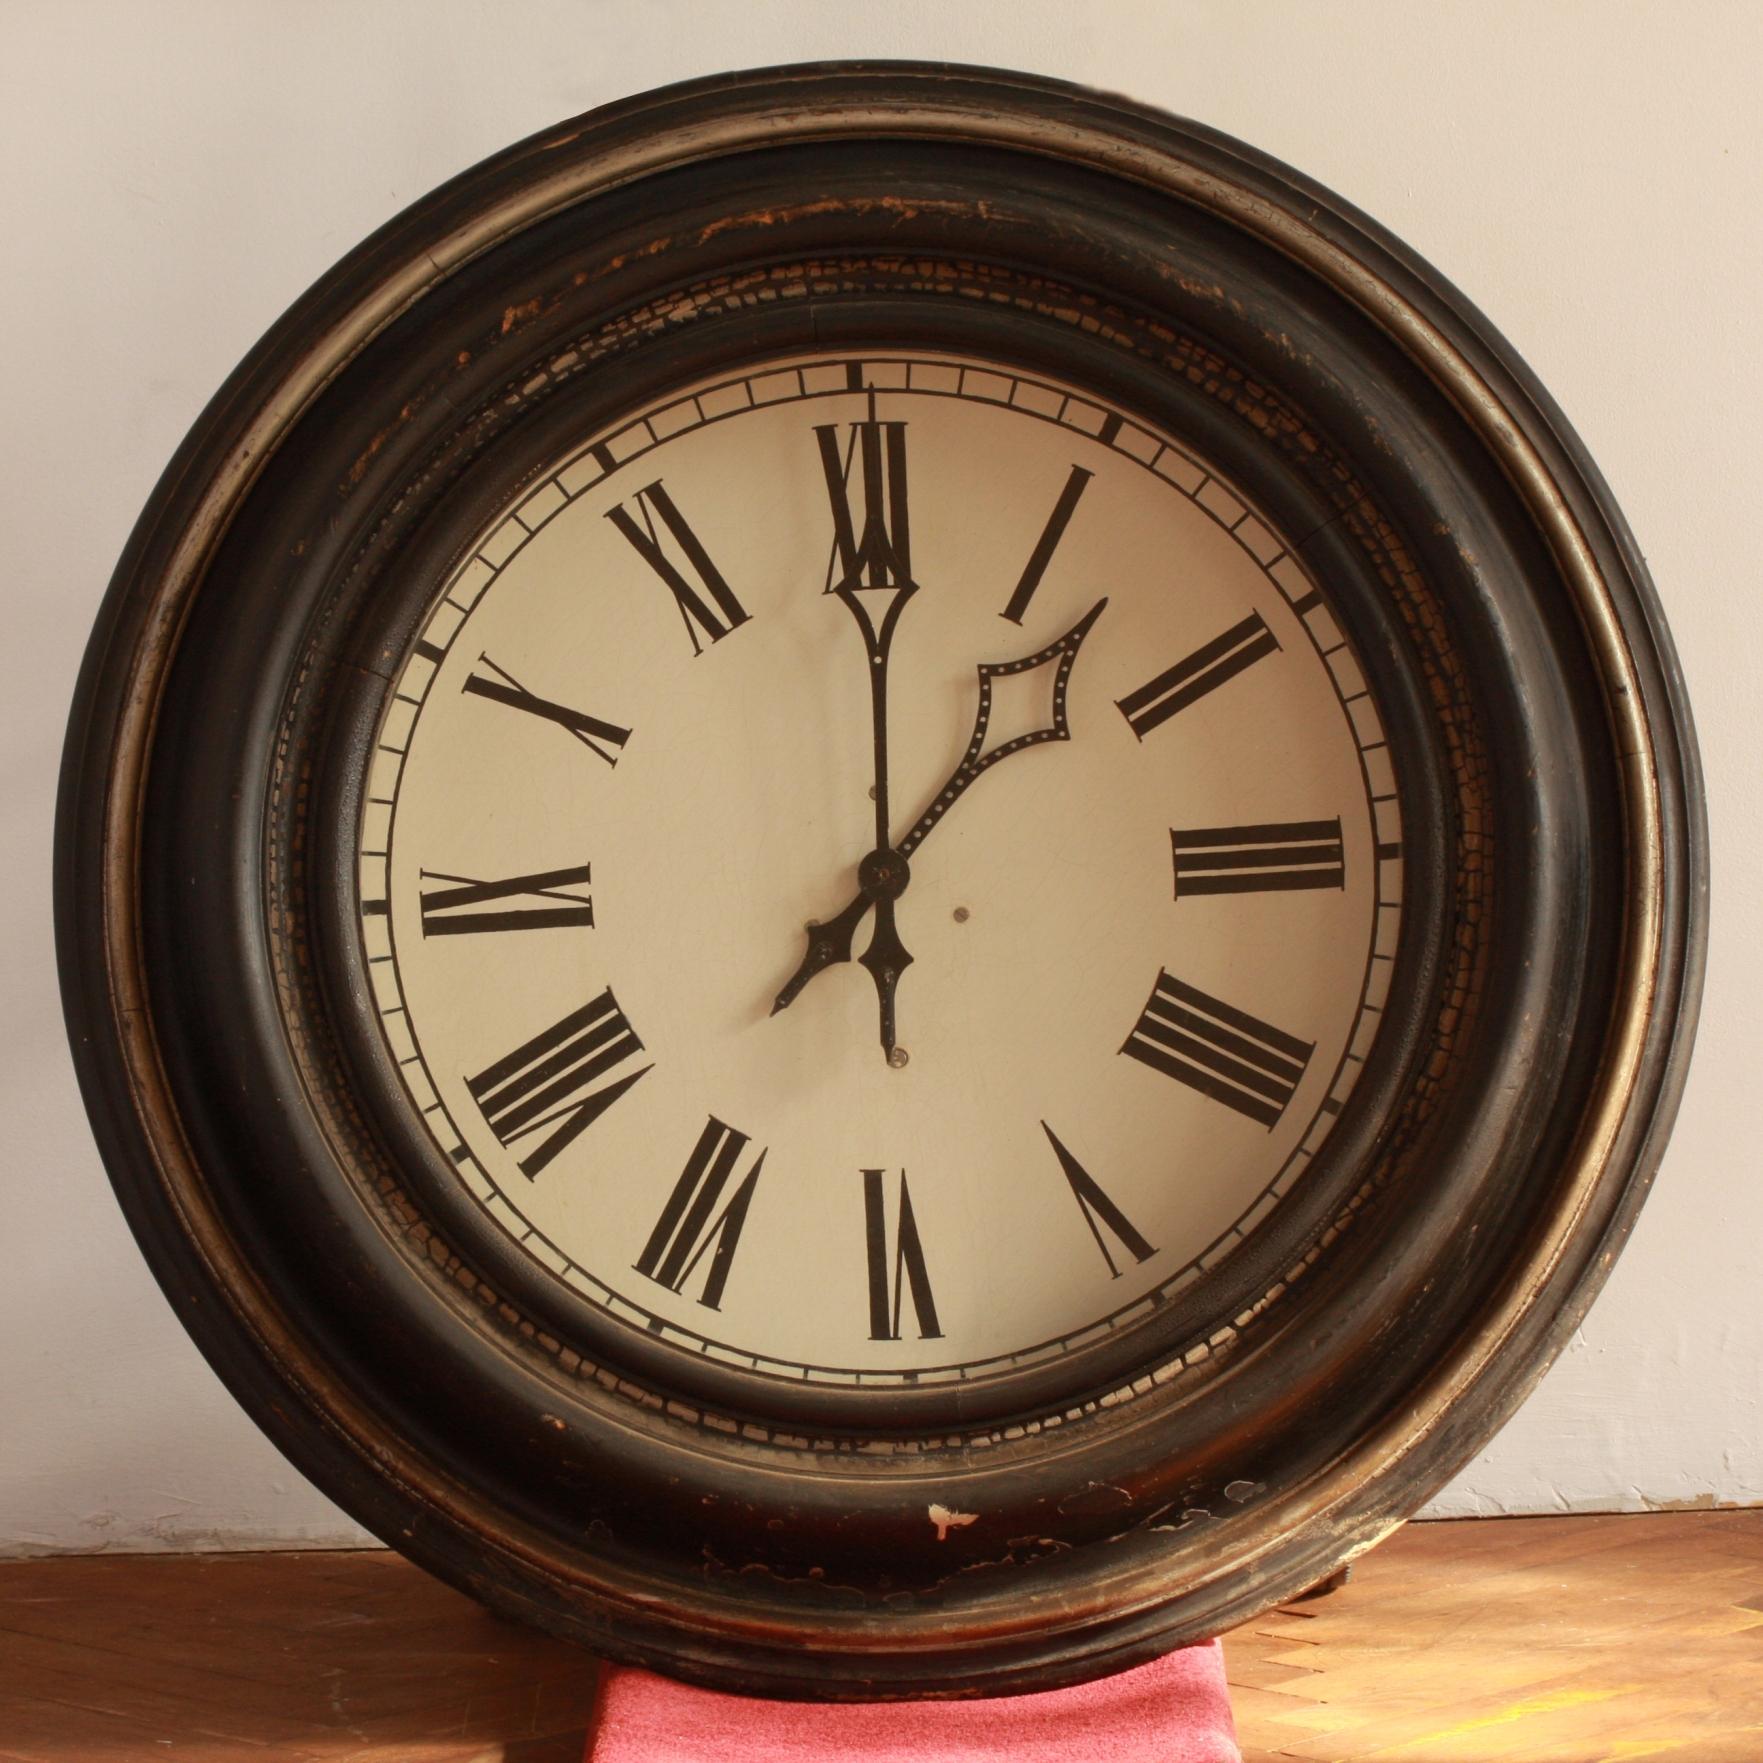 38 ½ inch oak cased iron dial grand railway clock supplied to the German Railway in 1890s. 
Marked Junghans on original unrestored mechanism. Lathed, strongly profiled wooden frame, in original color version, black stained with silvered edge, sheet